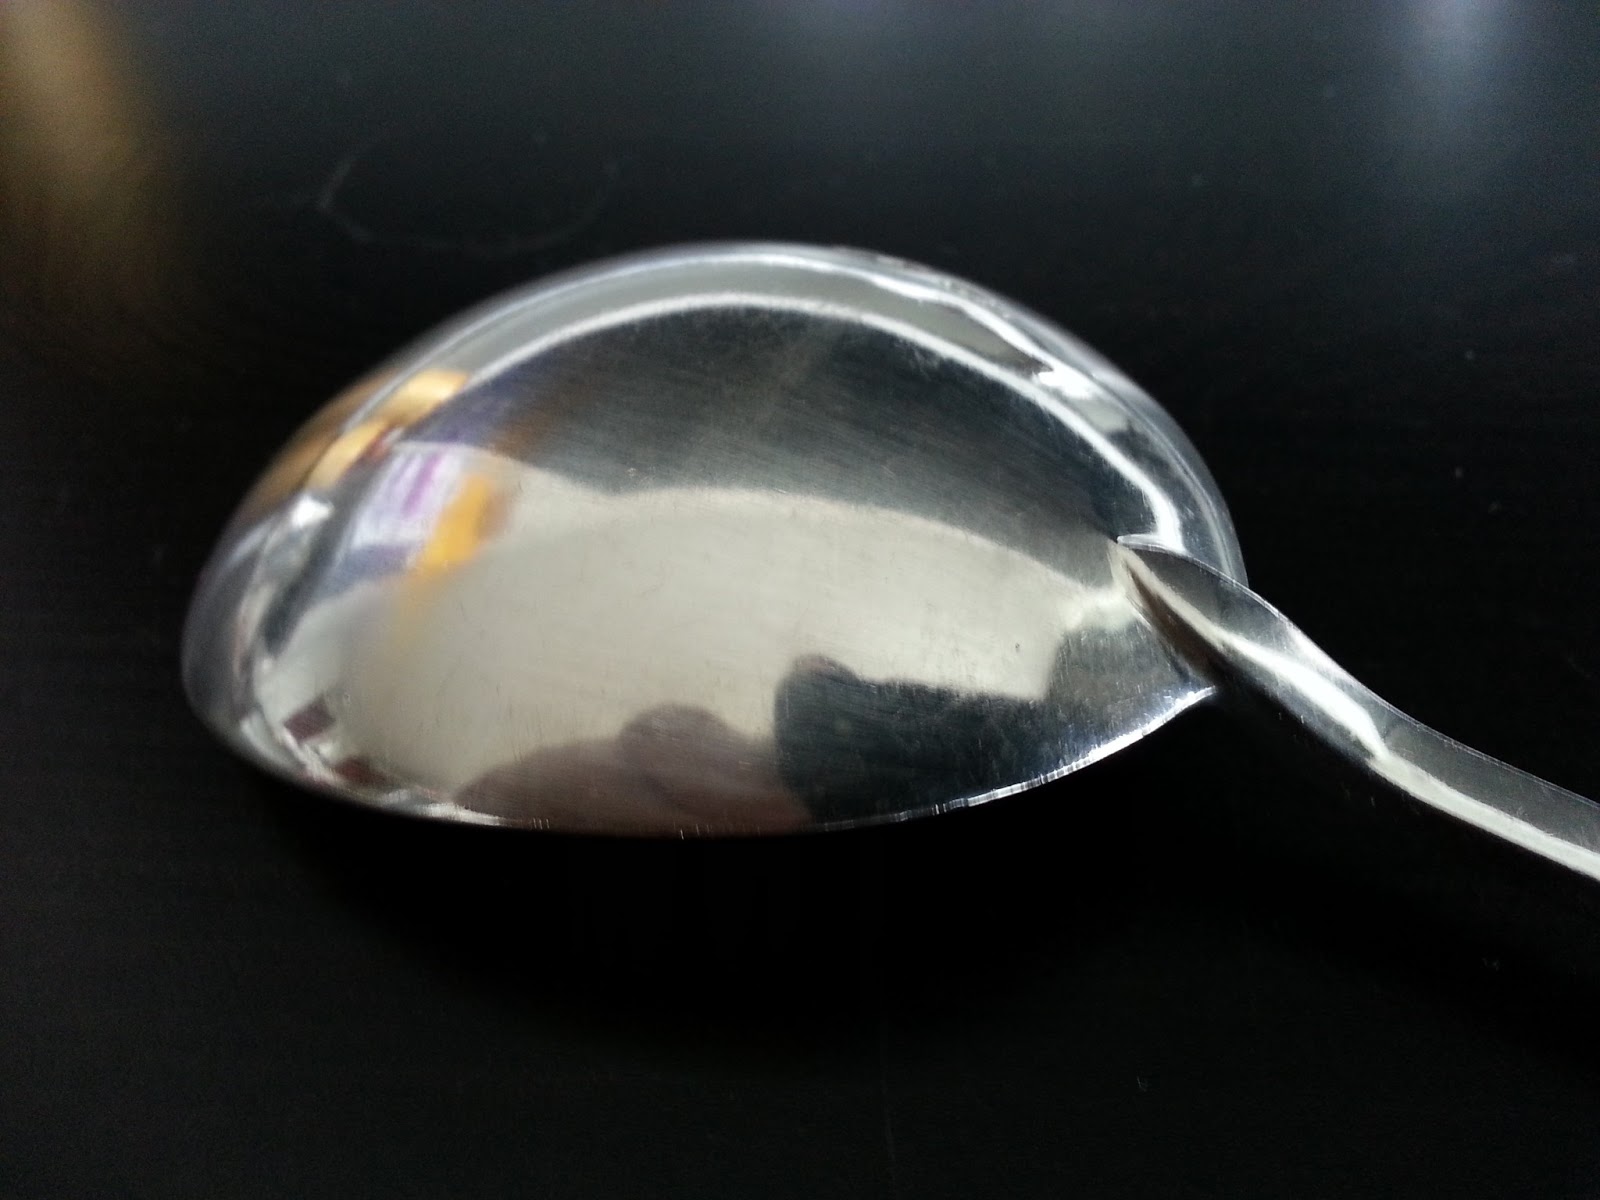 http://www.ebay.co.uk/itm/Art-Deco-c-1932-solid-silver-Seal-Topped-spoon-ornamented-London-William-Fearn-/171749568435?